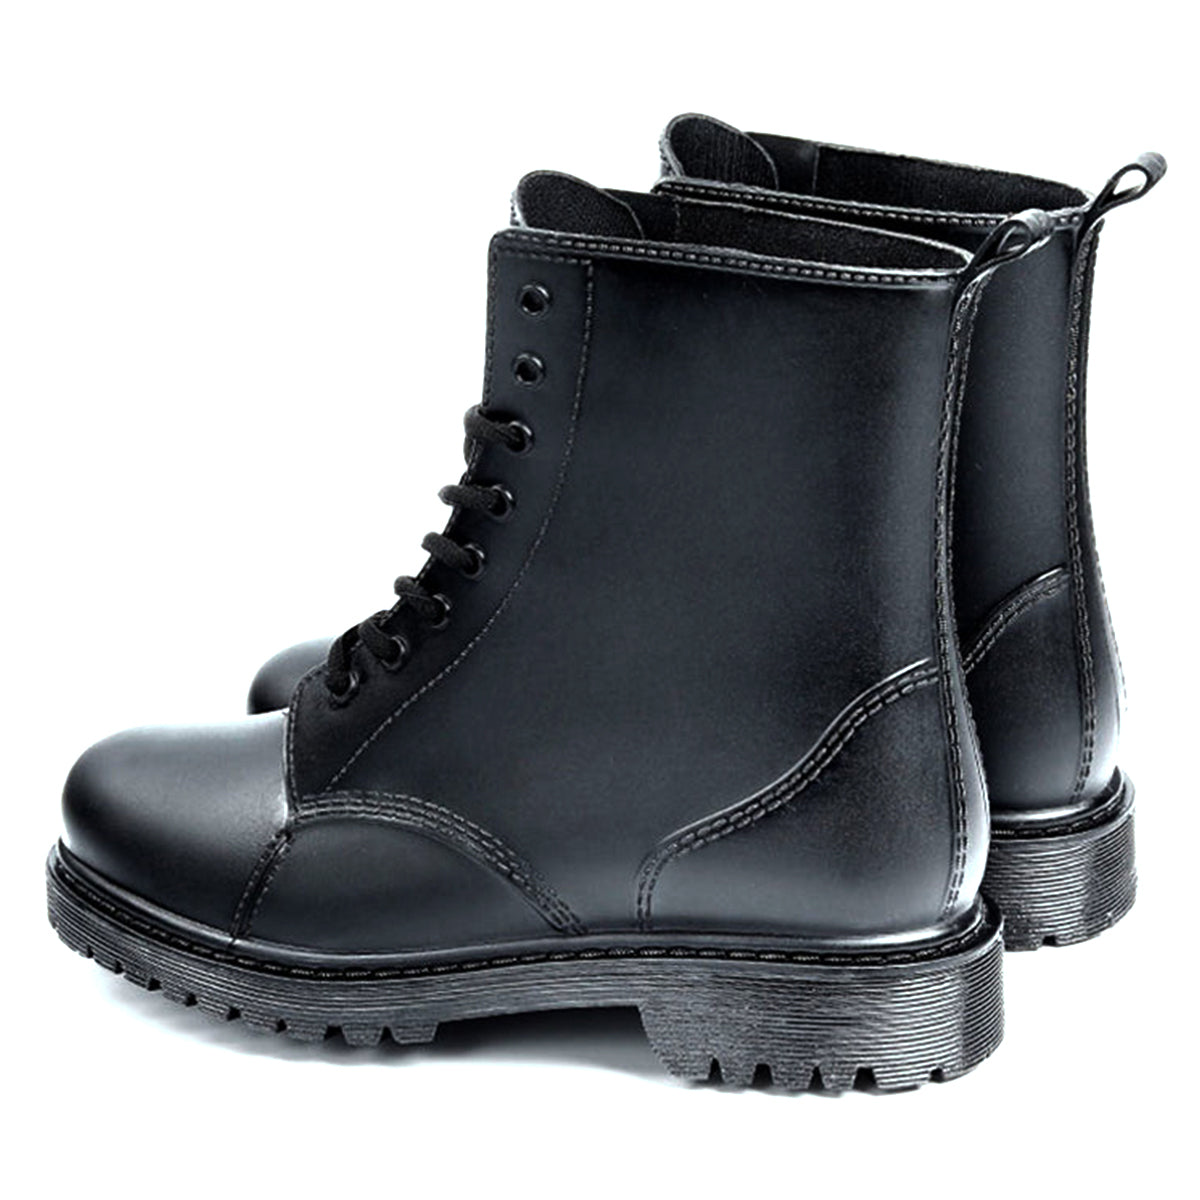 Nomad Black Leather Waterproof Boots